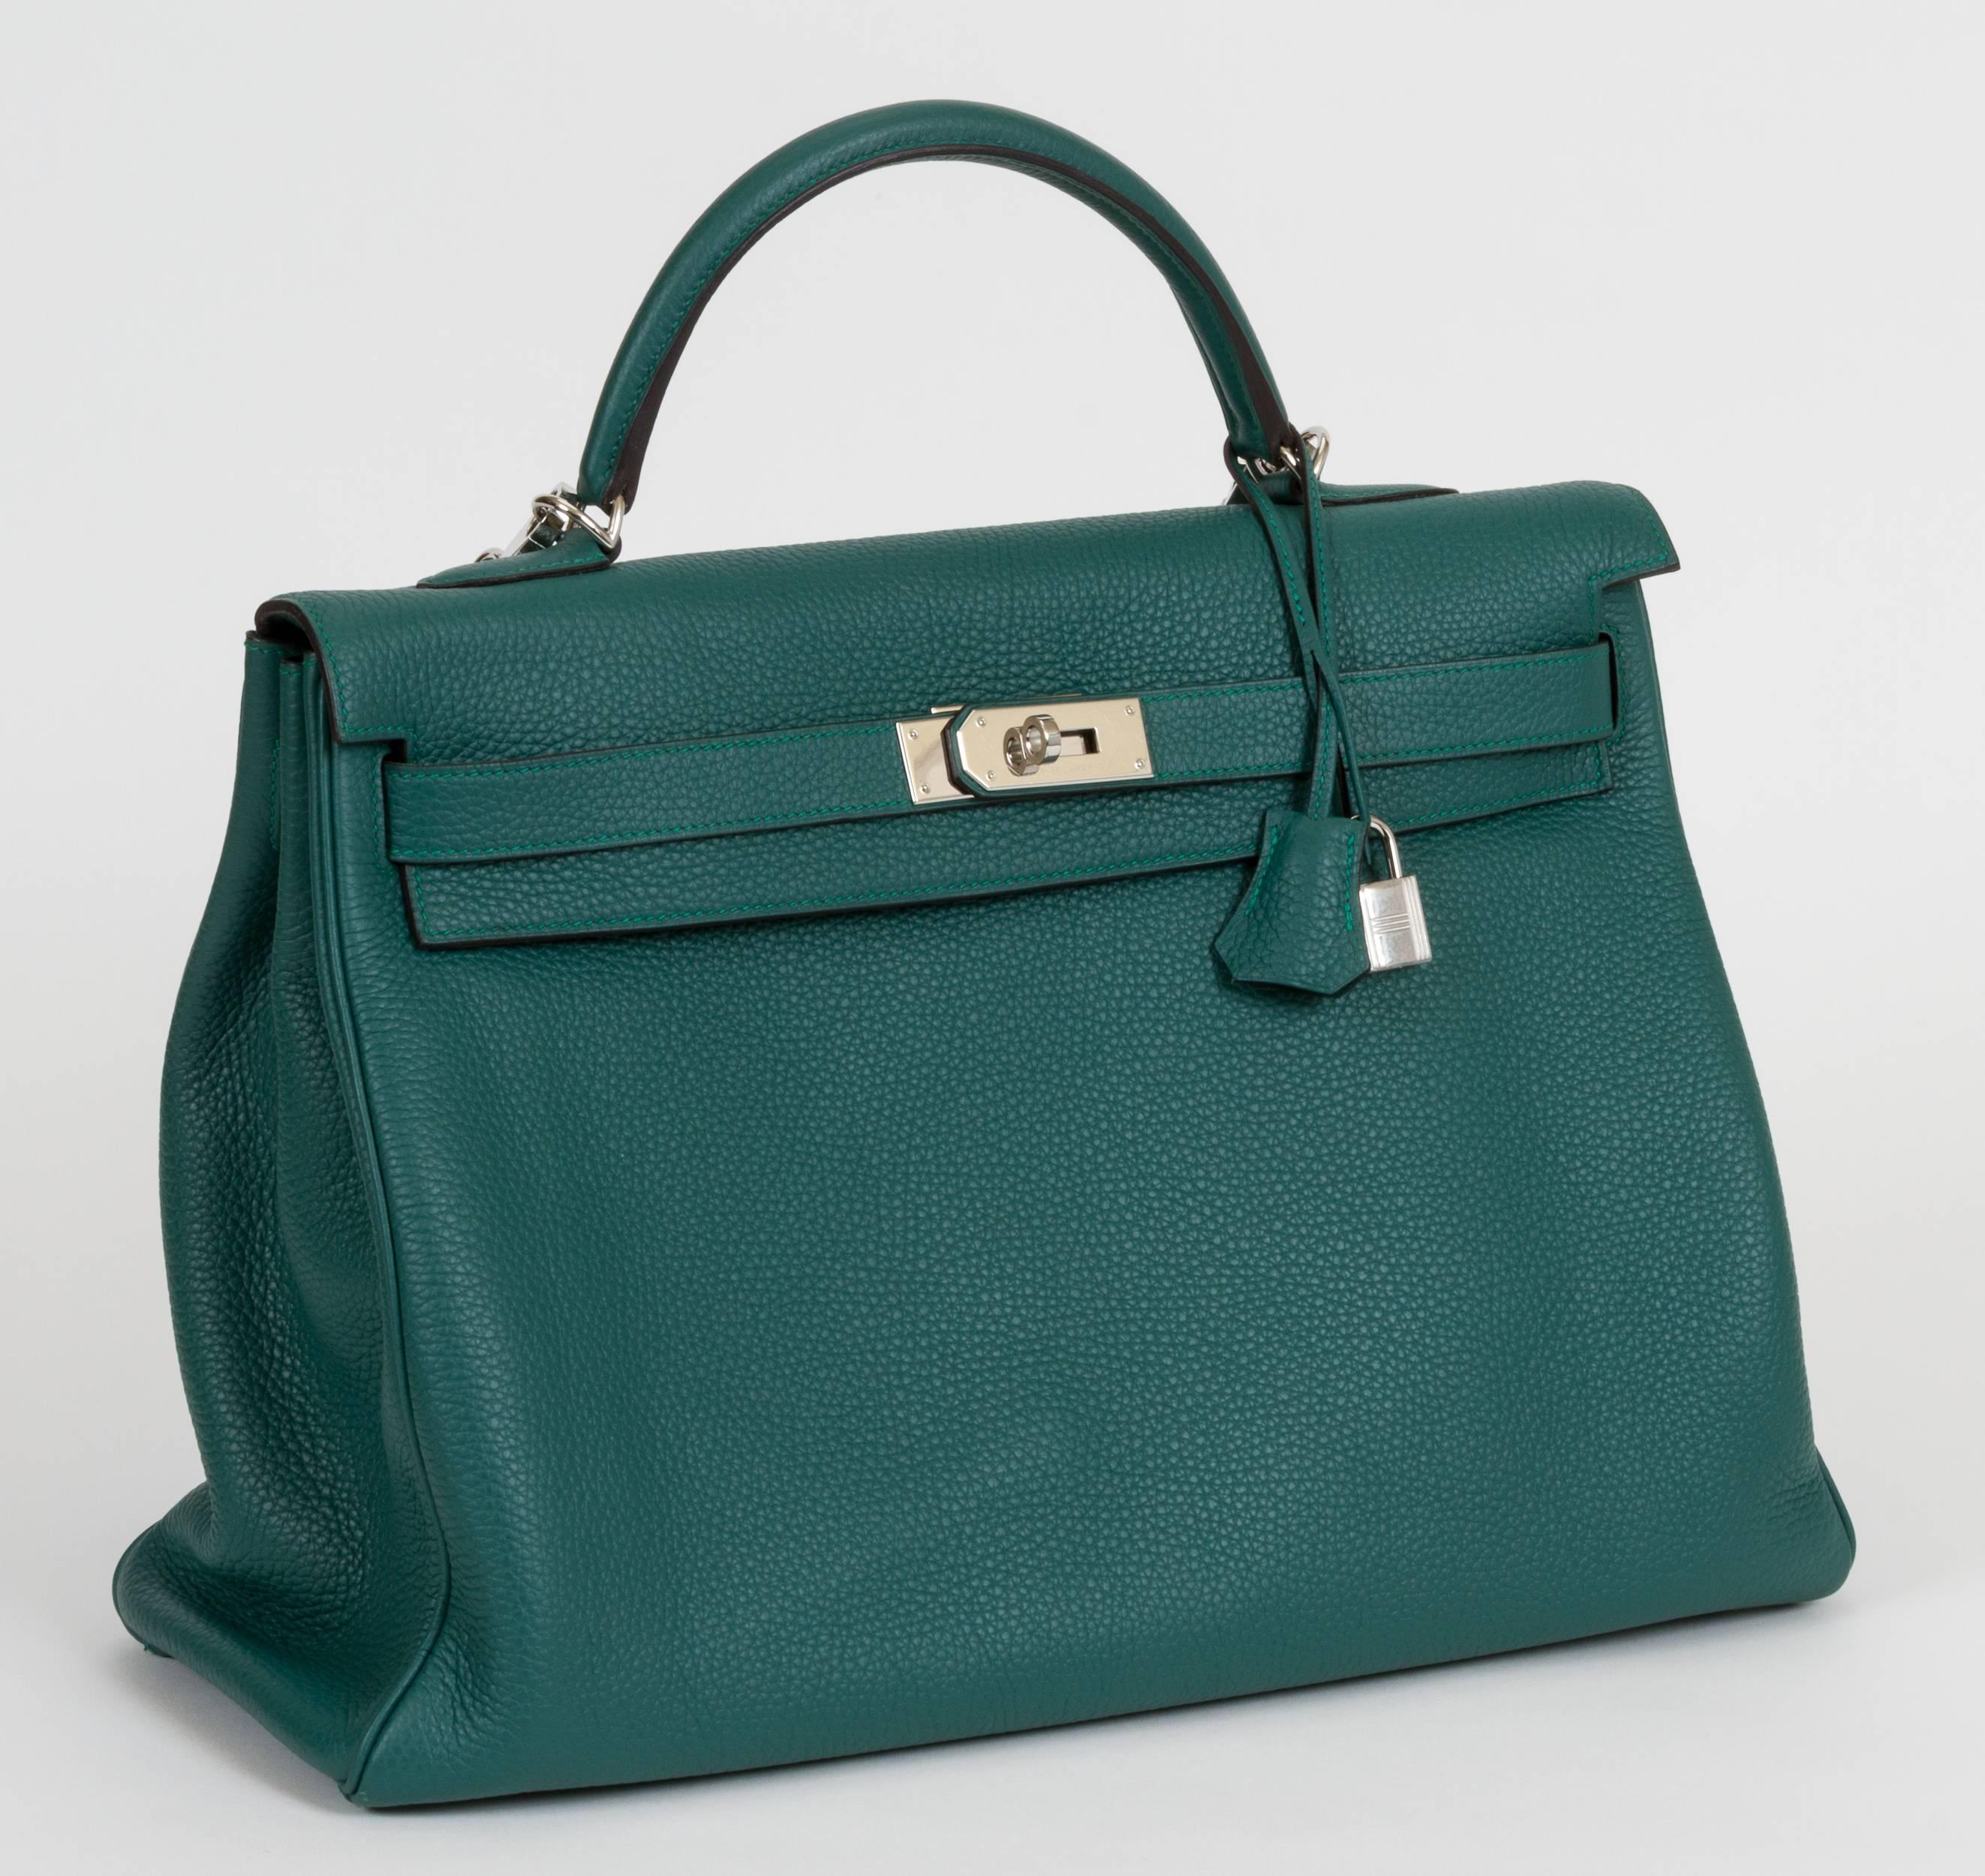 Hermès Kelly bag in Malachite Togo leather and palladium hardware. 40cm. Partial plastic on plates. Detachable strap in two-tone Malachite and turquoise included. Handle drop, 4.